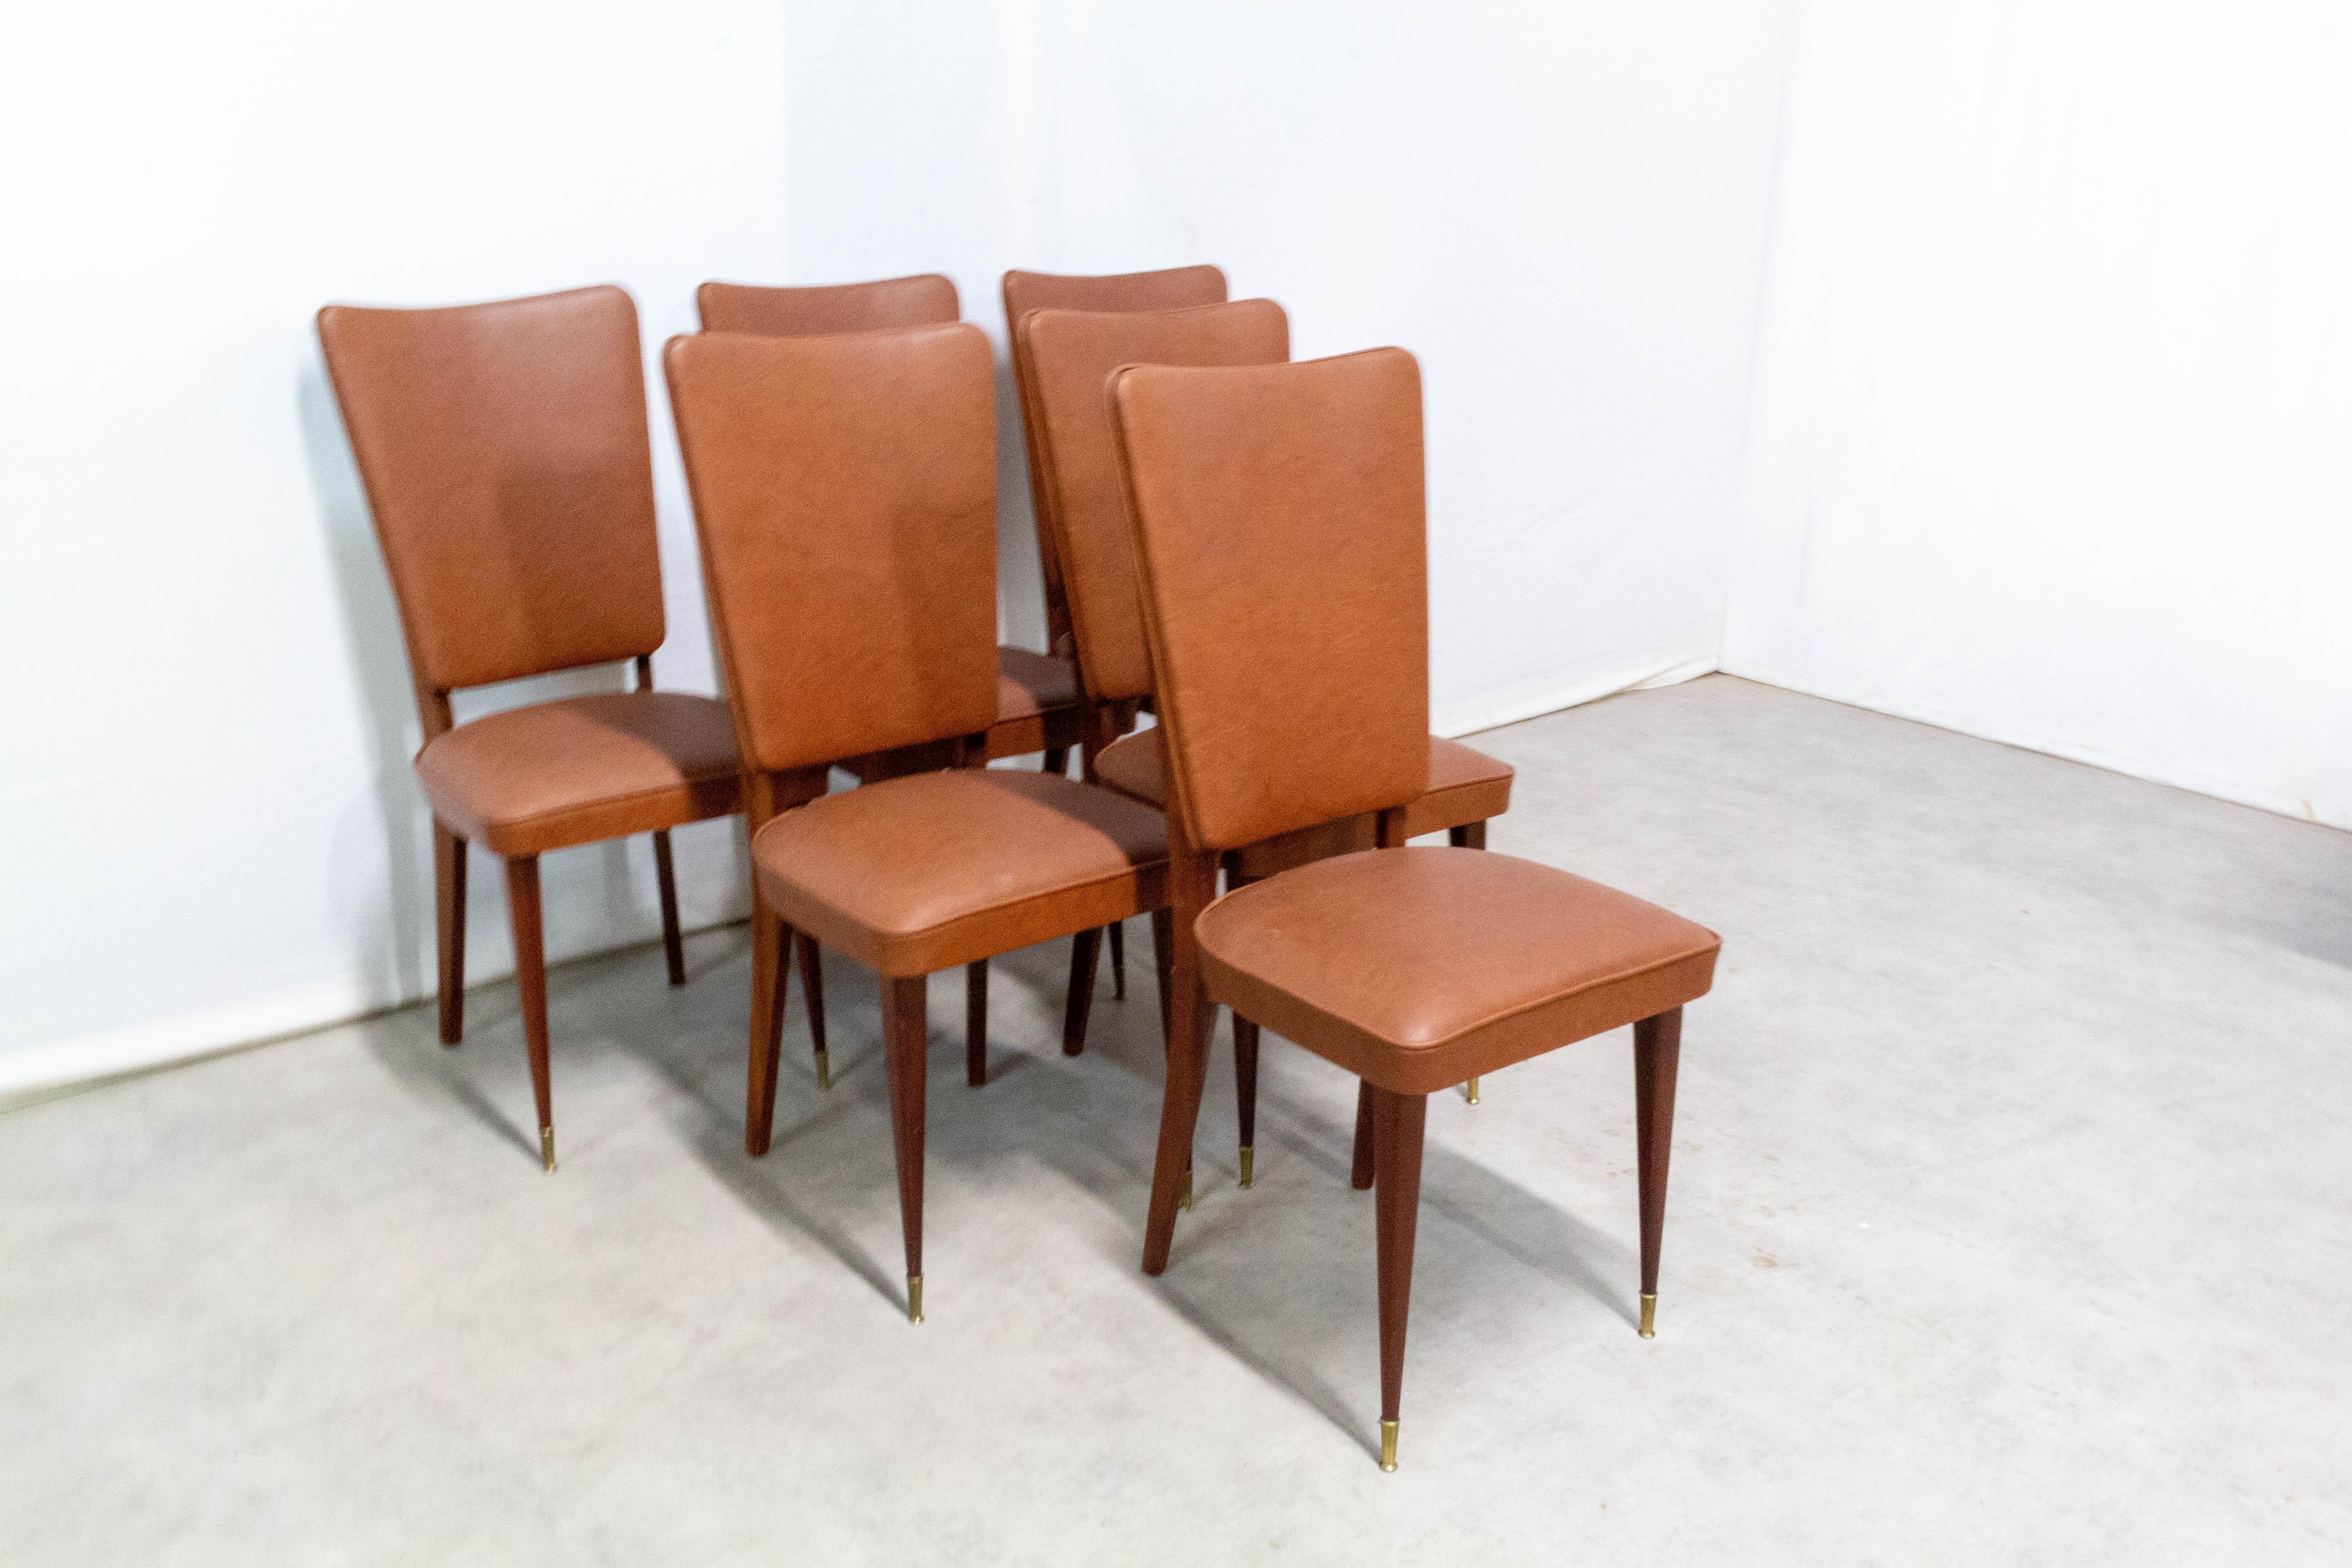 Six Midcentury Dining Chairs Brown Skai and Iroko Wood French, circa 1960 For Sale 8